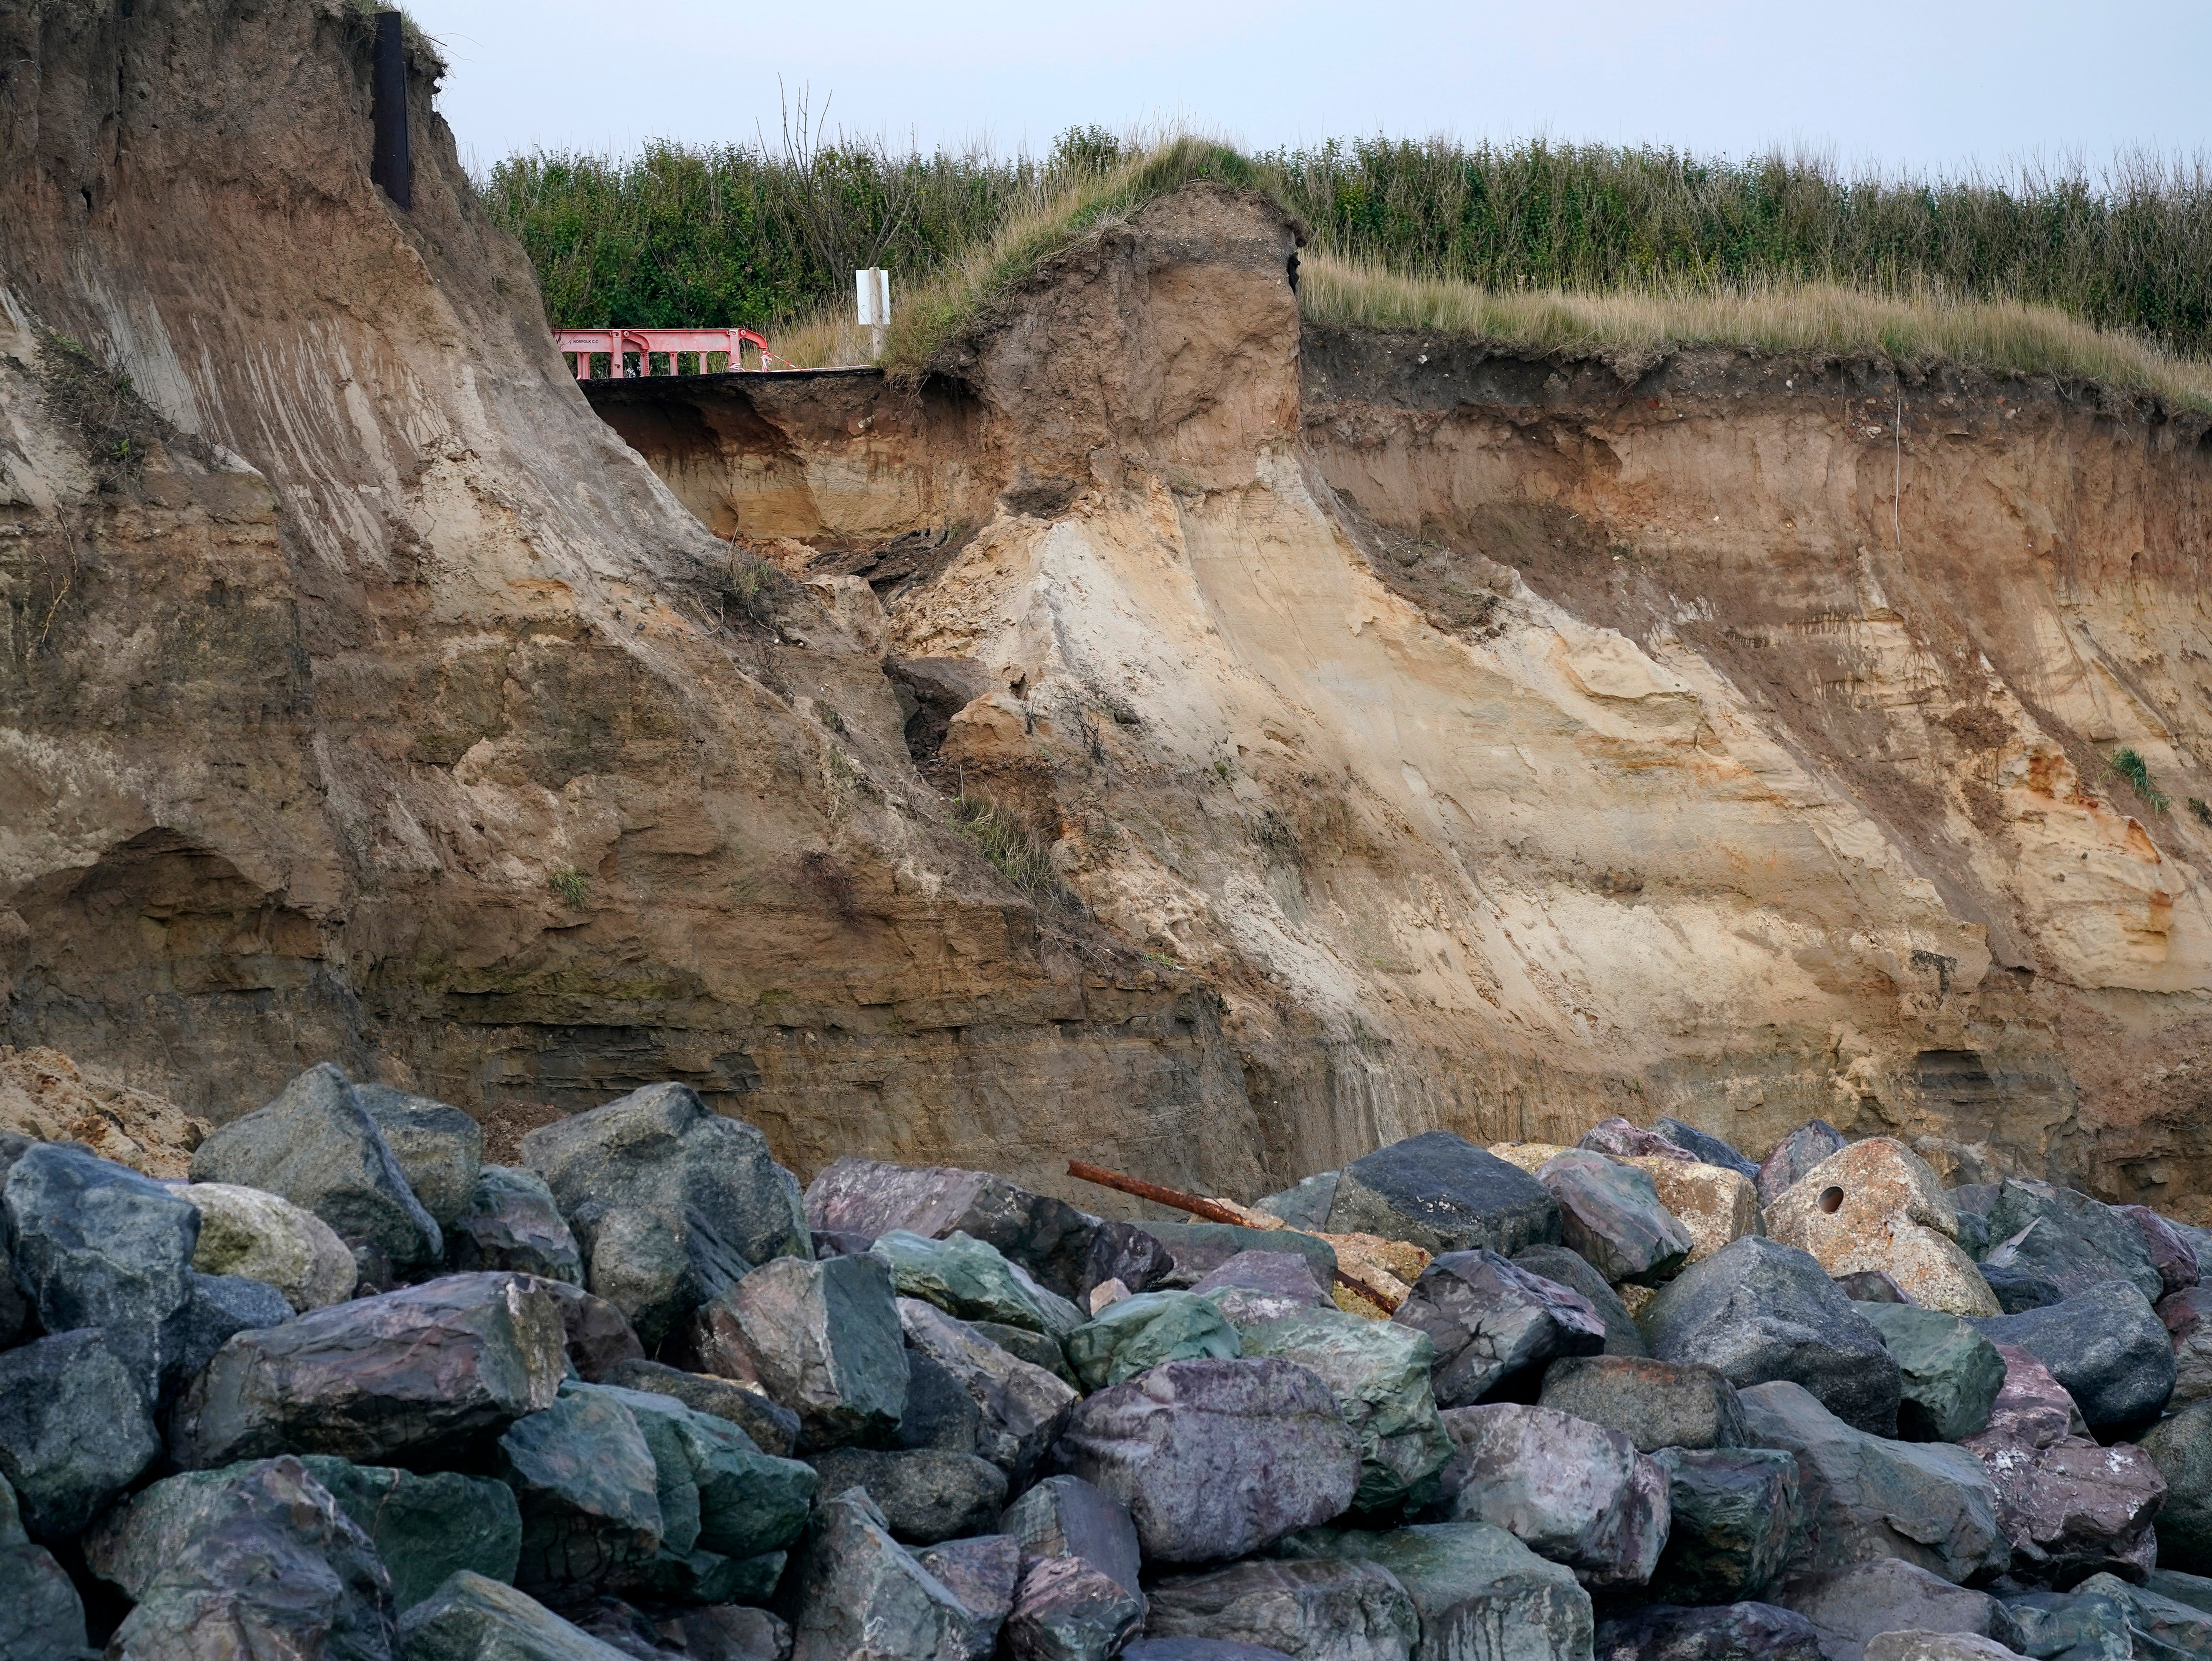 The end of a tarmac road shows the devastation caused by coastal erosion of the cliff face in the village of Happisburgh, Norfolk in 2019